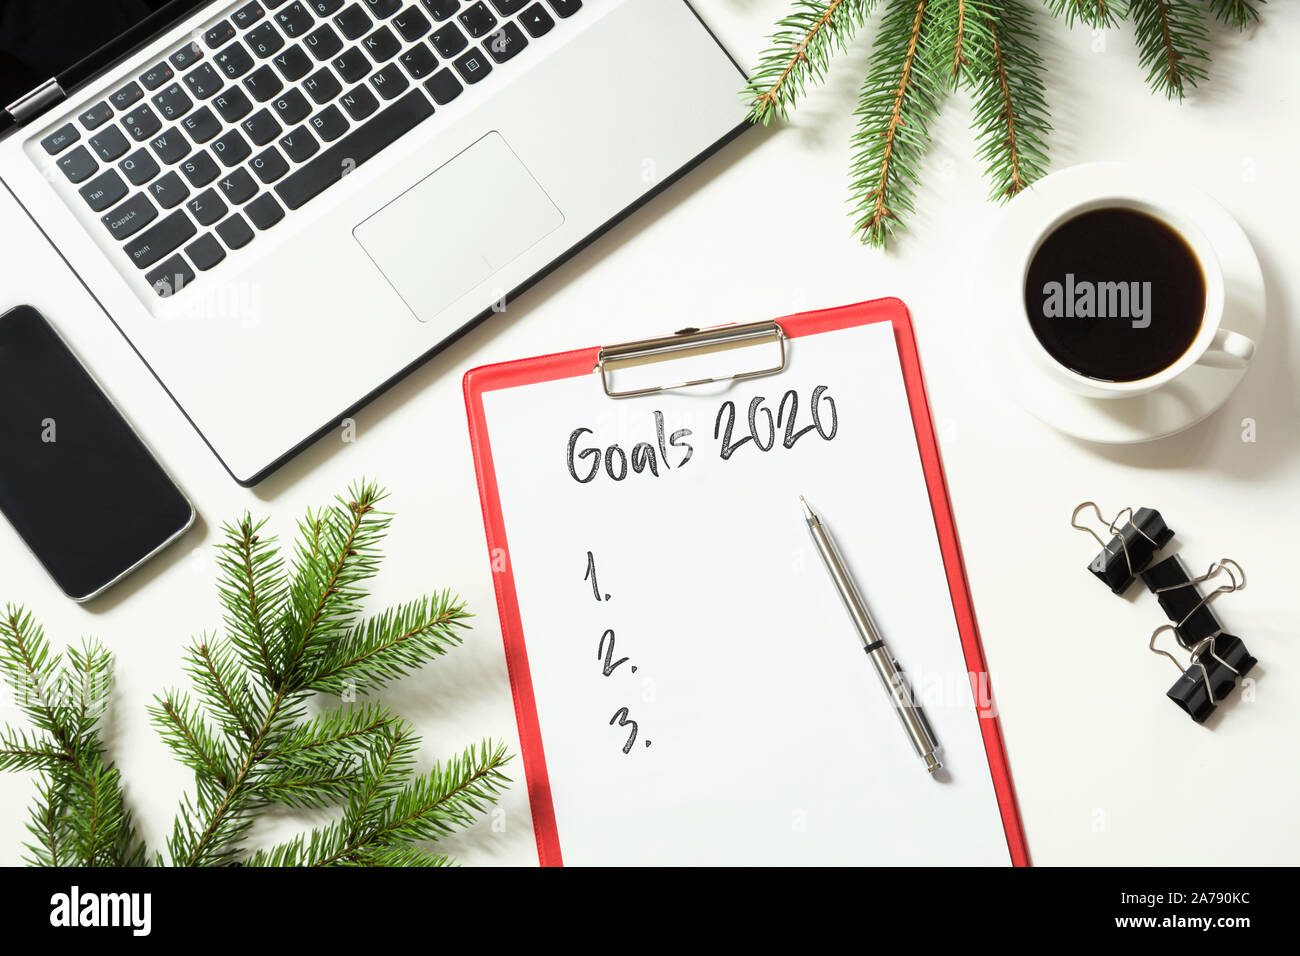 2020 New Year goals, planning, dreams and wishes. Office workplace with laptop, fir branches on white background. Top view with copy space. Stock Photo